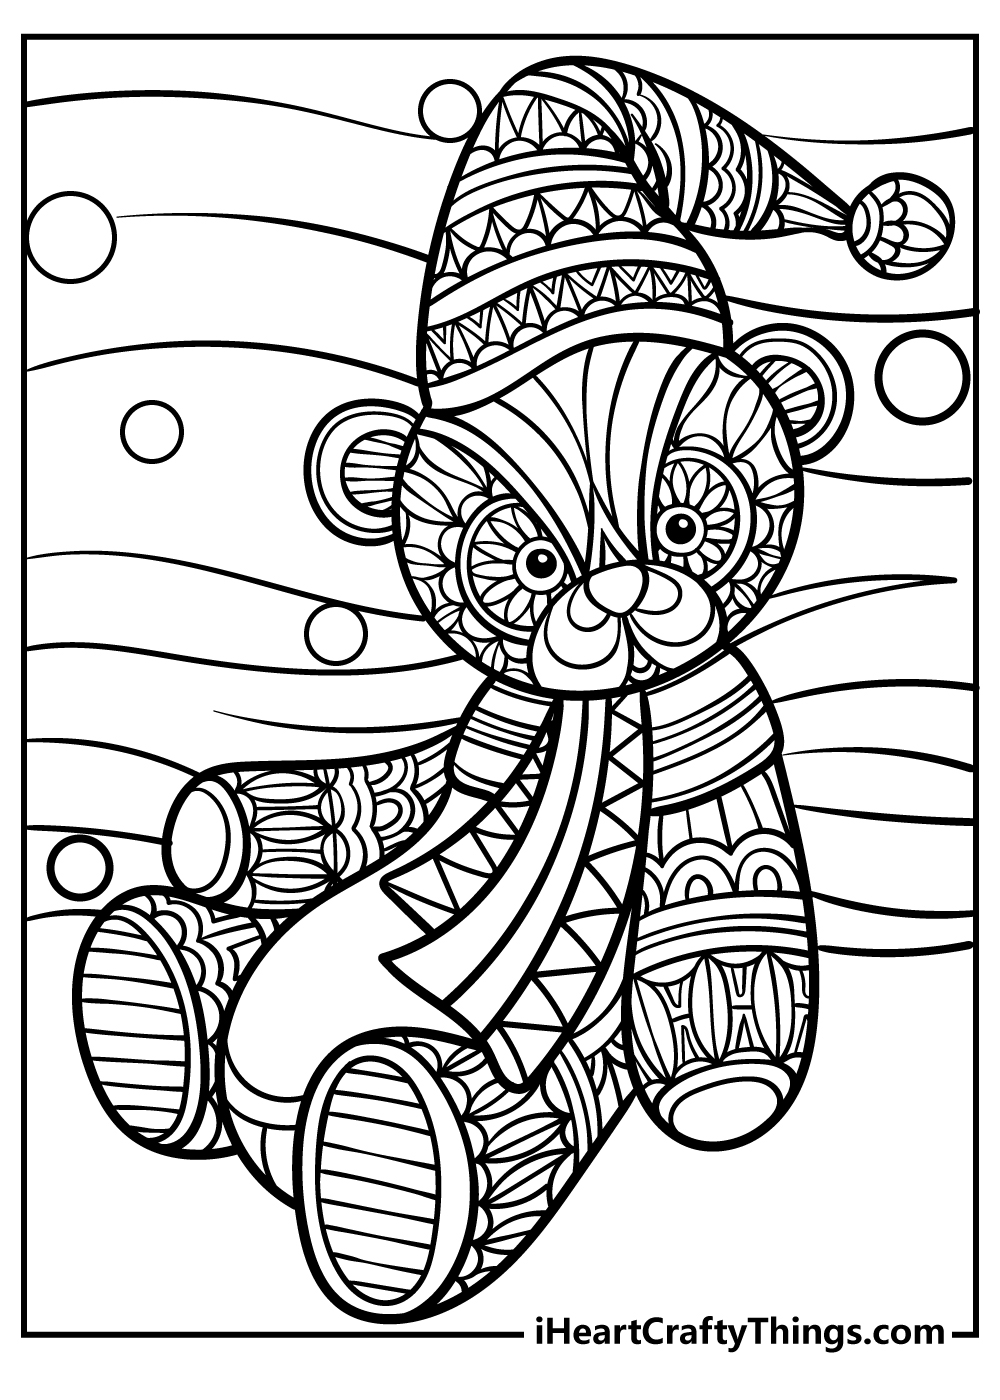 Adult Coloring Pages free print out